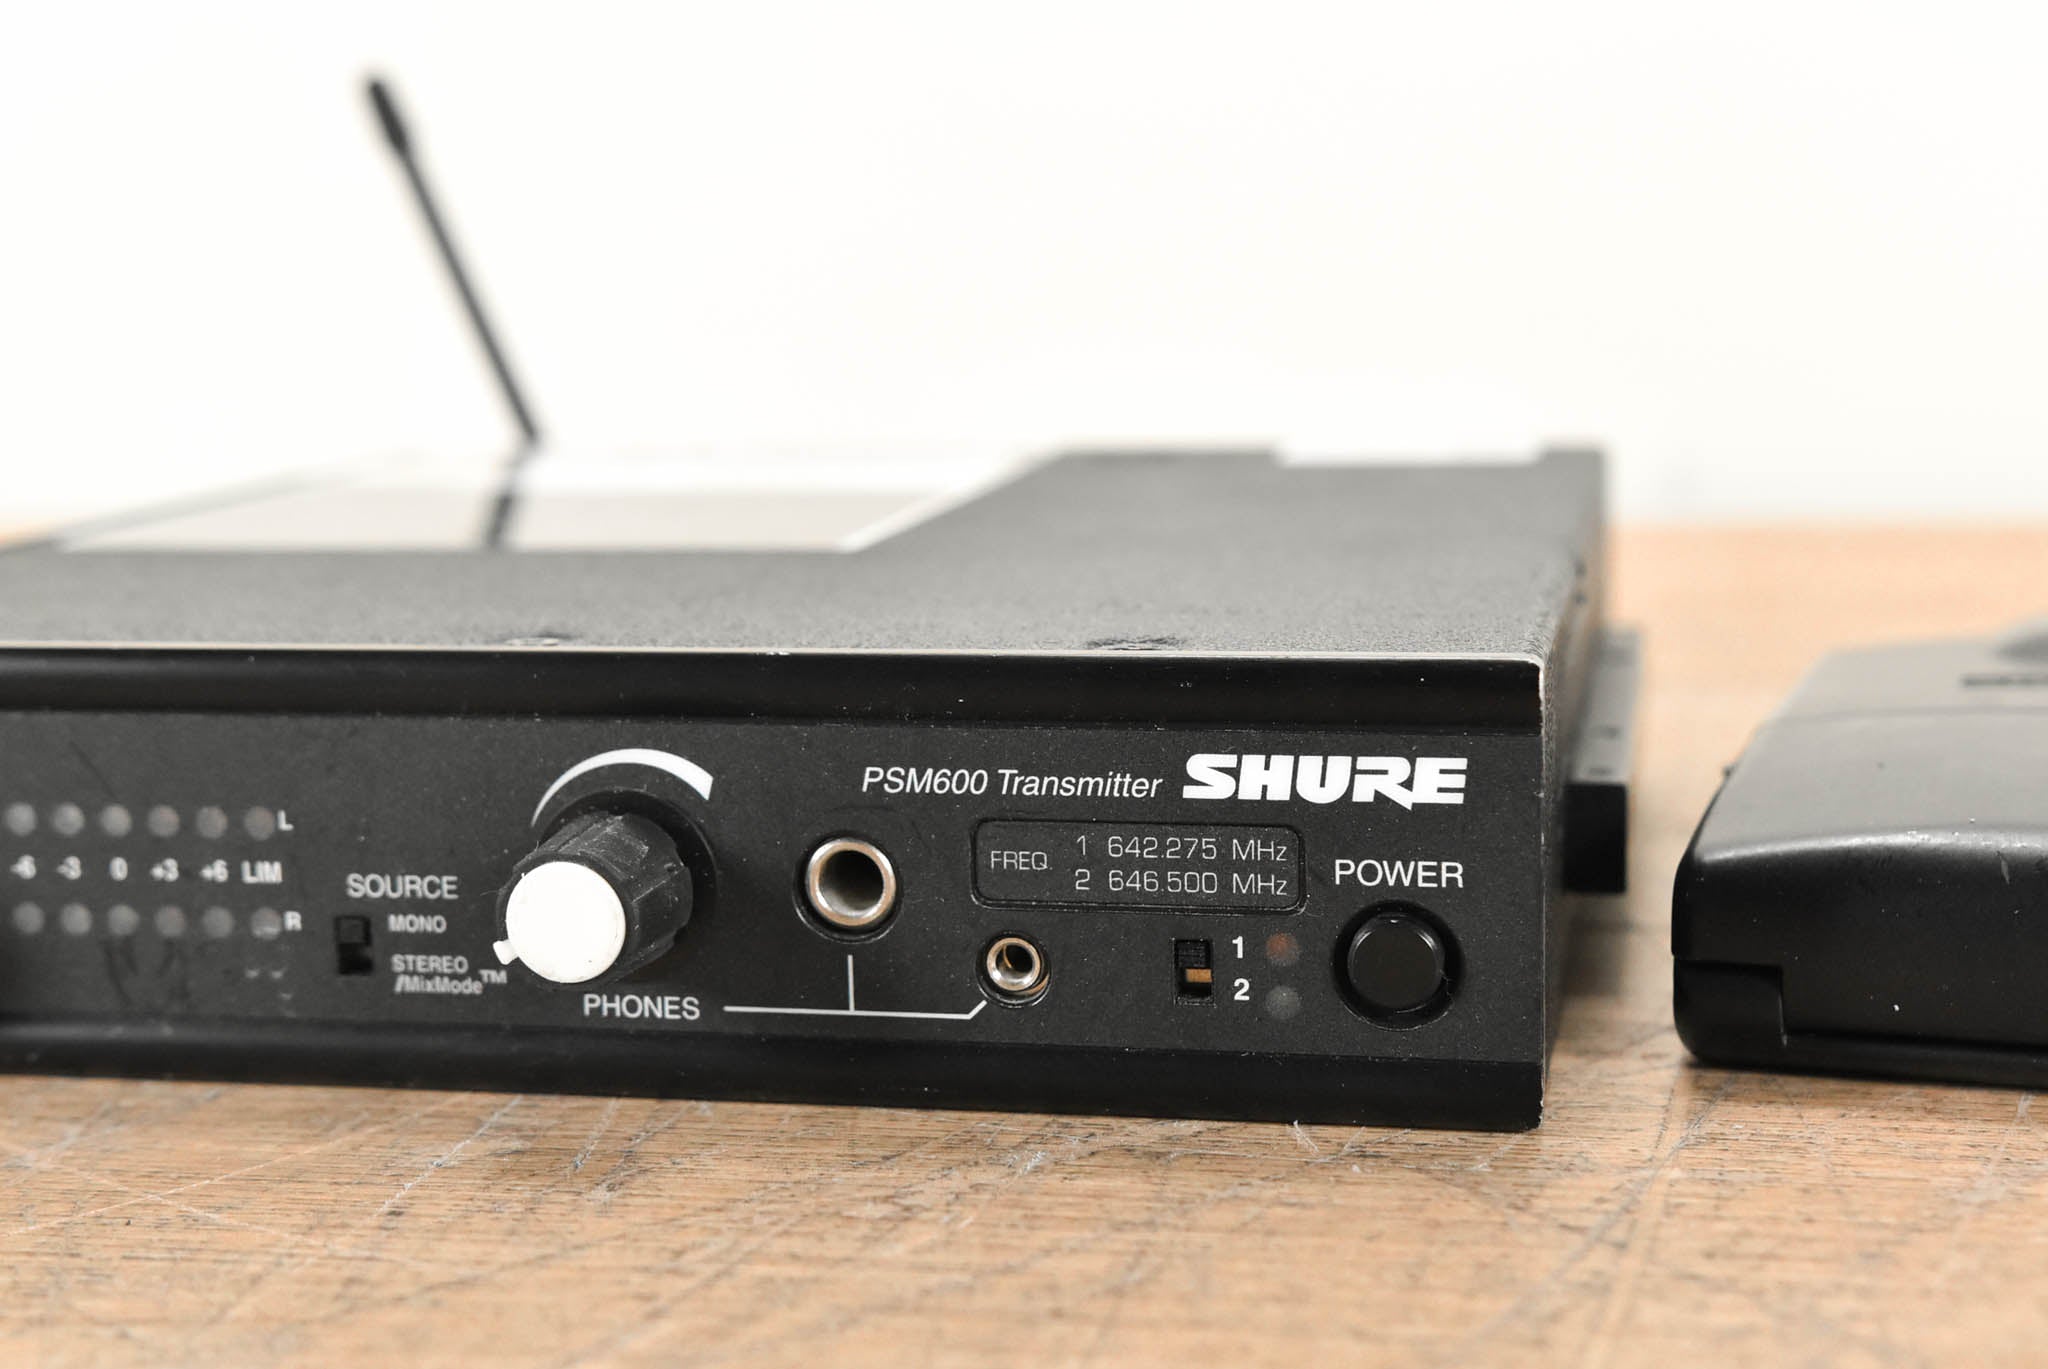 Shure PSM600 Wireless In-Ear Monitoring System - 642.275 and 646.500 MHz